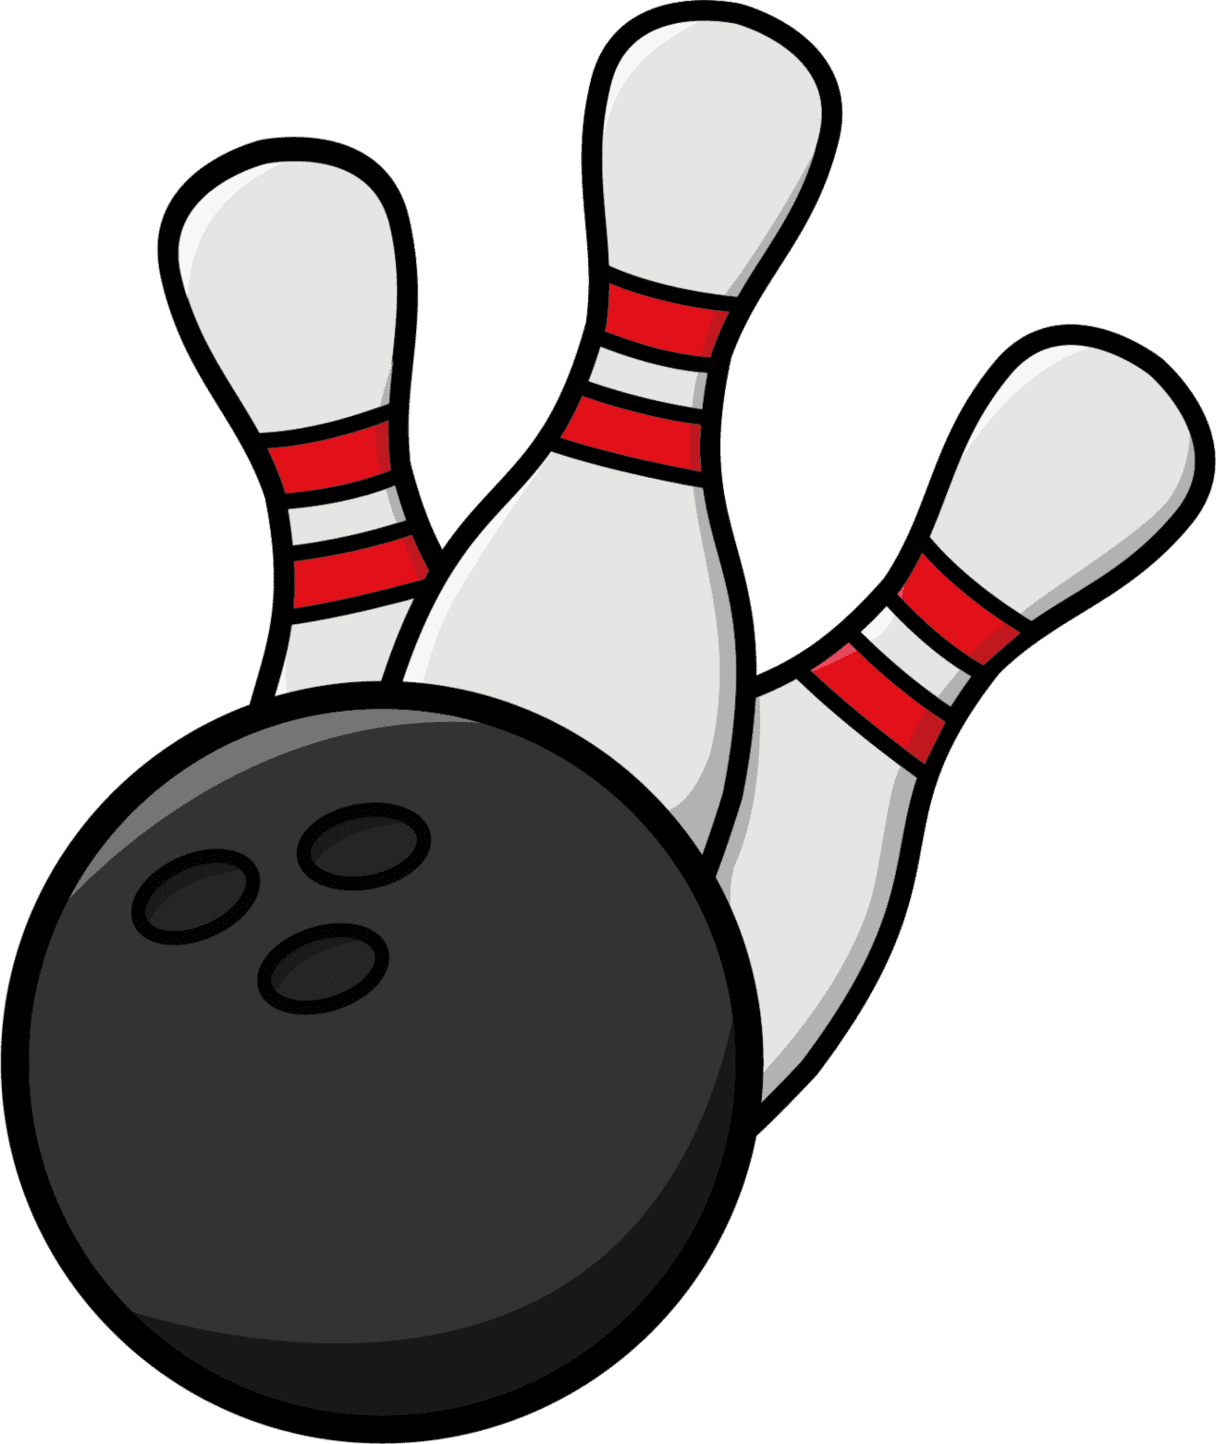 Bowling pin found bing from moziru clipart background